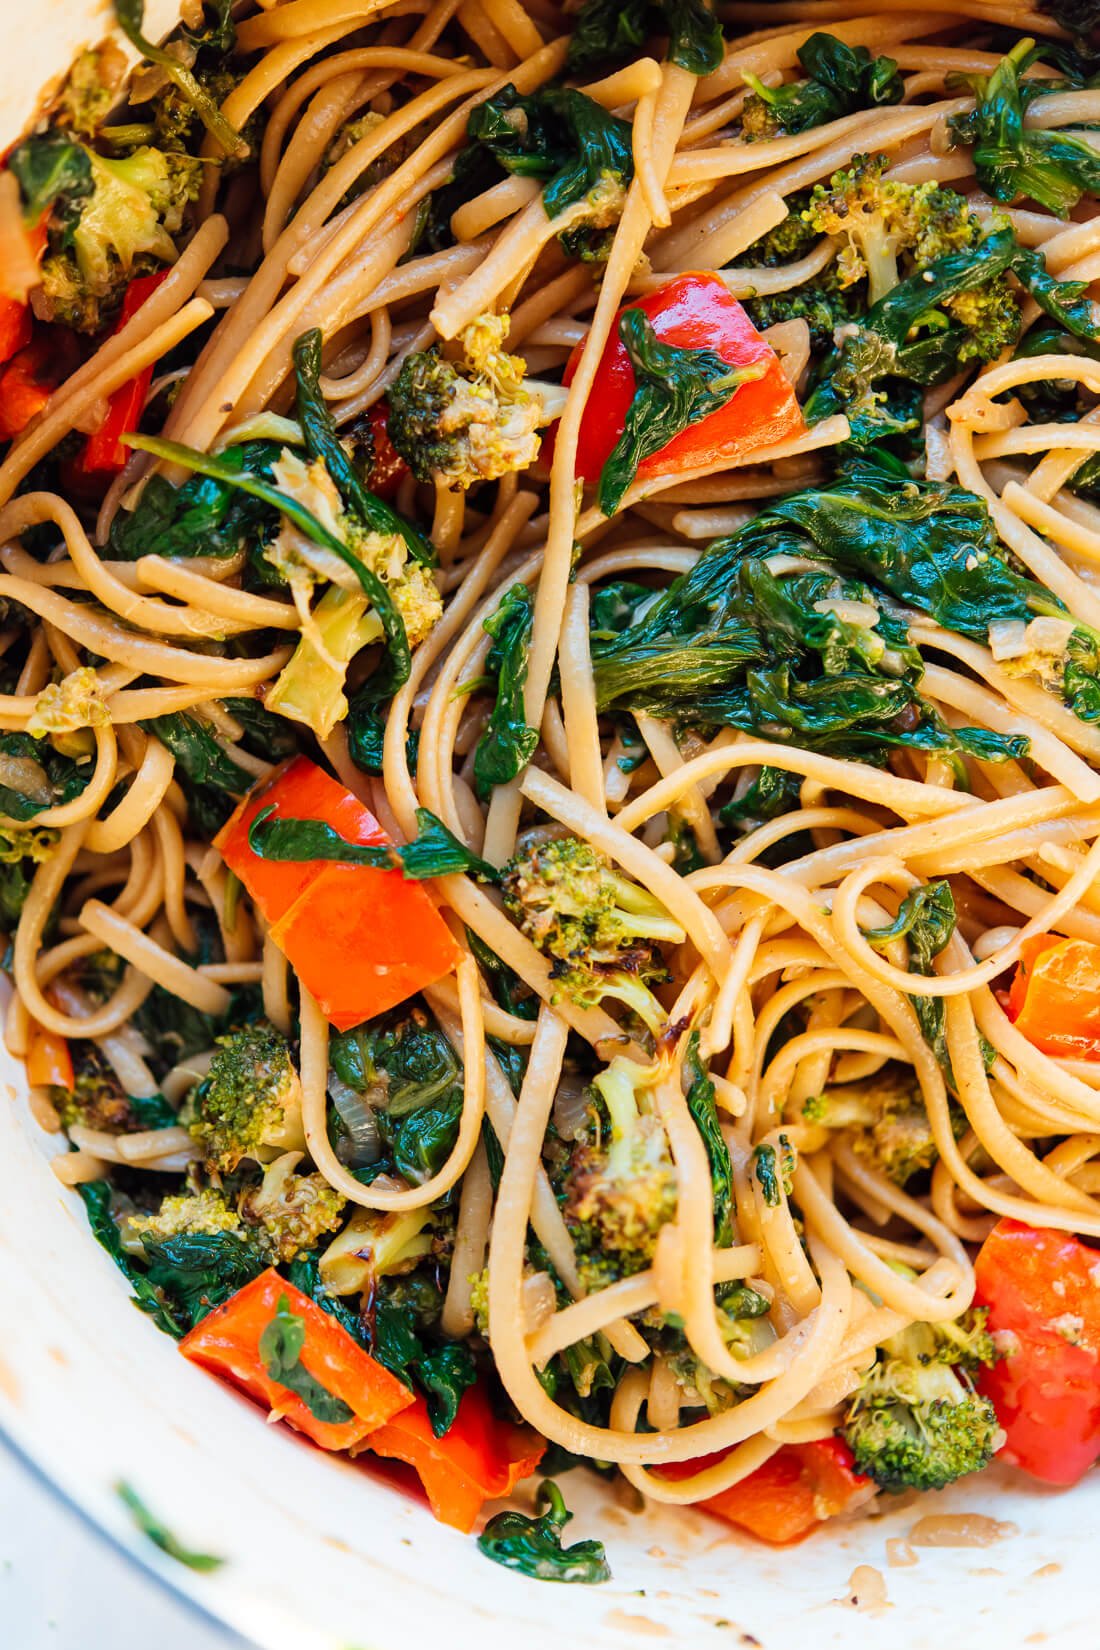 Balsamic spinach pasta with roasted vegetables